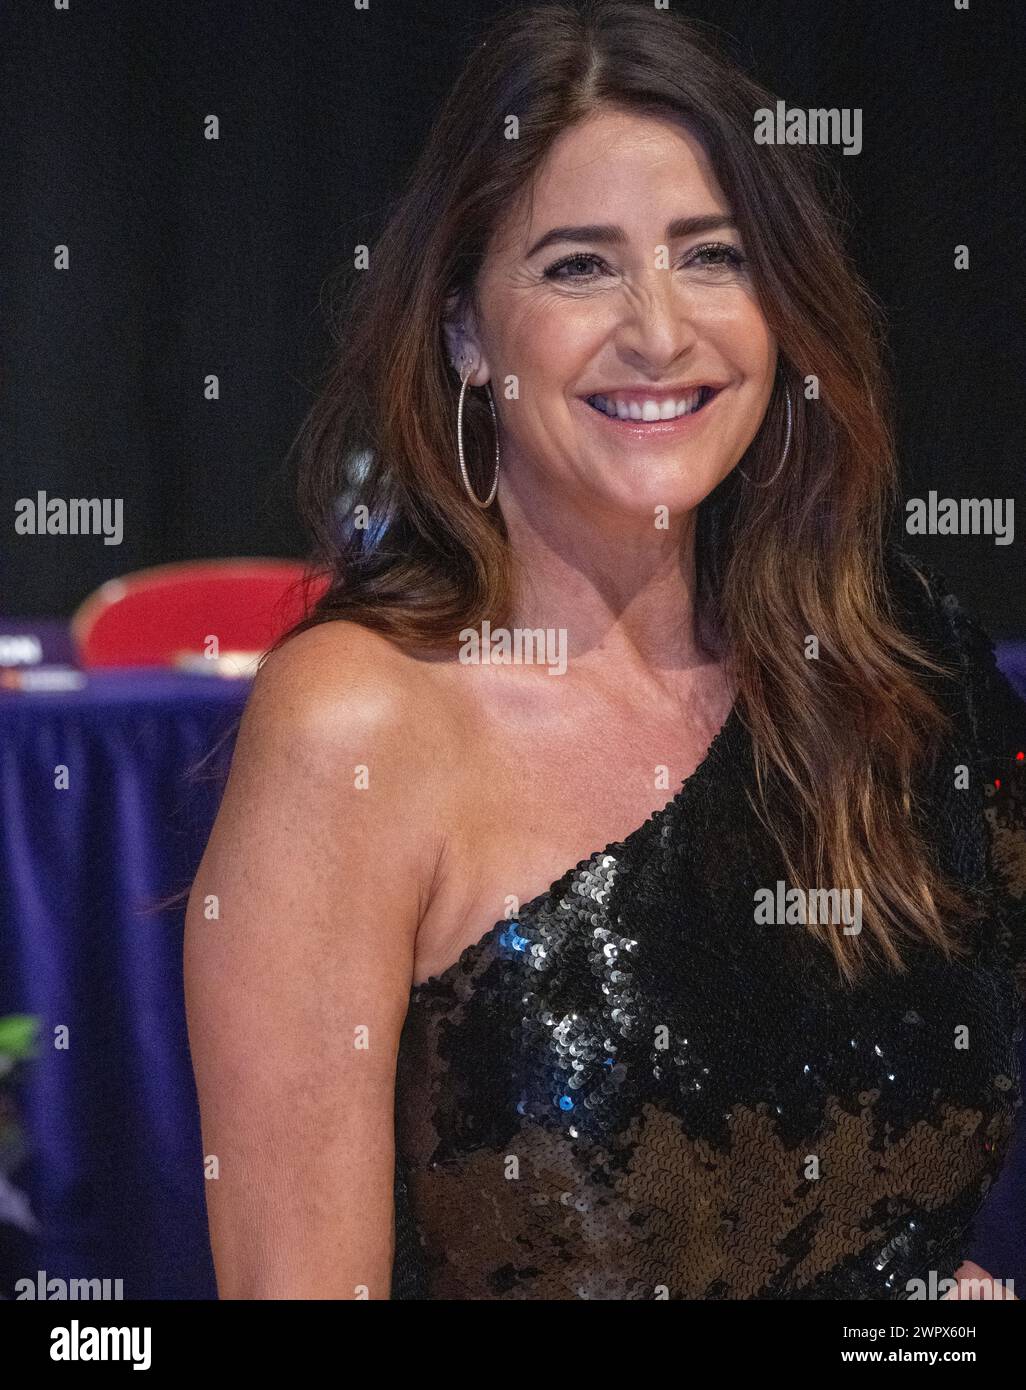 Brentwood Essex 9th Mar 2024 Strictly Air Ambulance fund raising event at the Brentwood Centre, Brentwood Essex. The show features Lisa Snowdon and professional dancers from the BBC's Strictly Come Dancing. Pictured Lisa Snowdon Credit: Ian Davidson/Alamy Live News Stock Photo